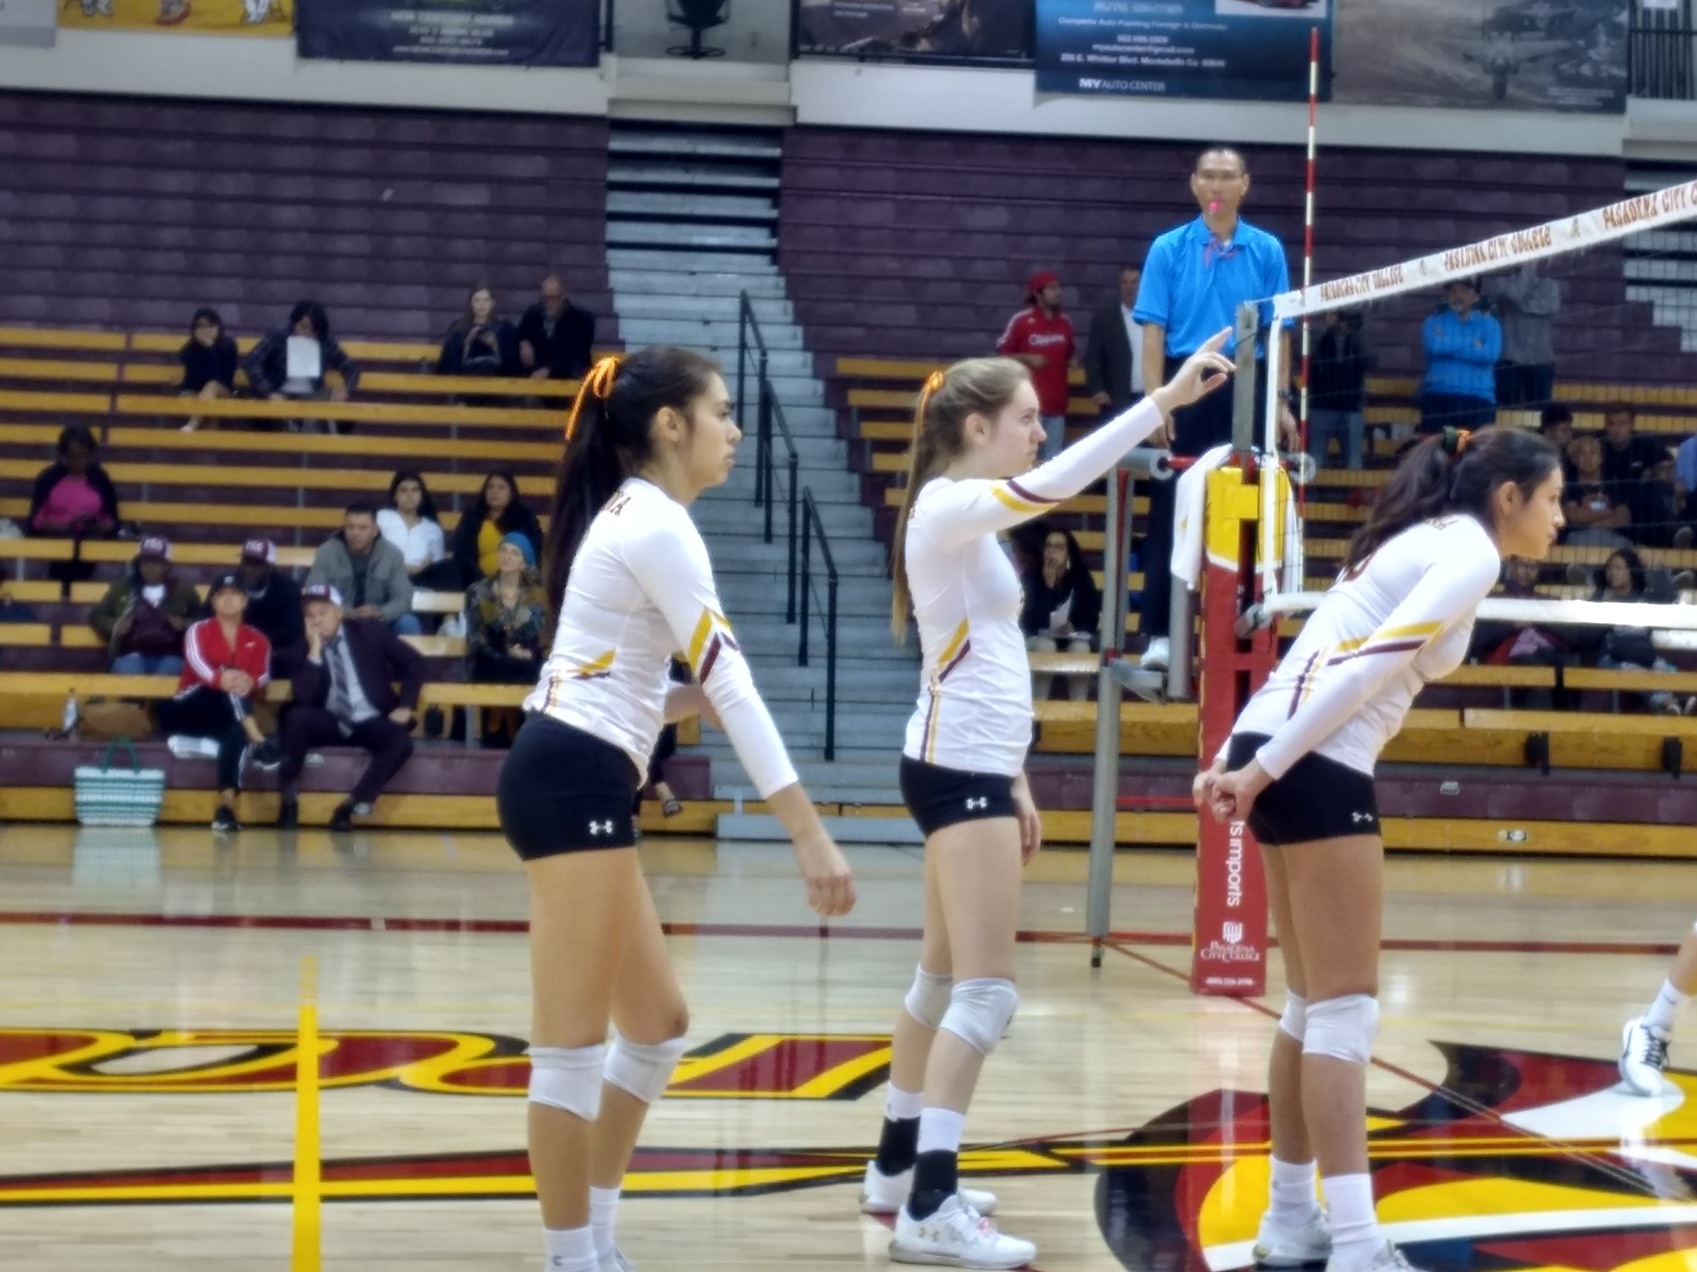 The Lancers front row gets into position right before match point on Wednesday night.